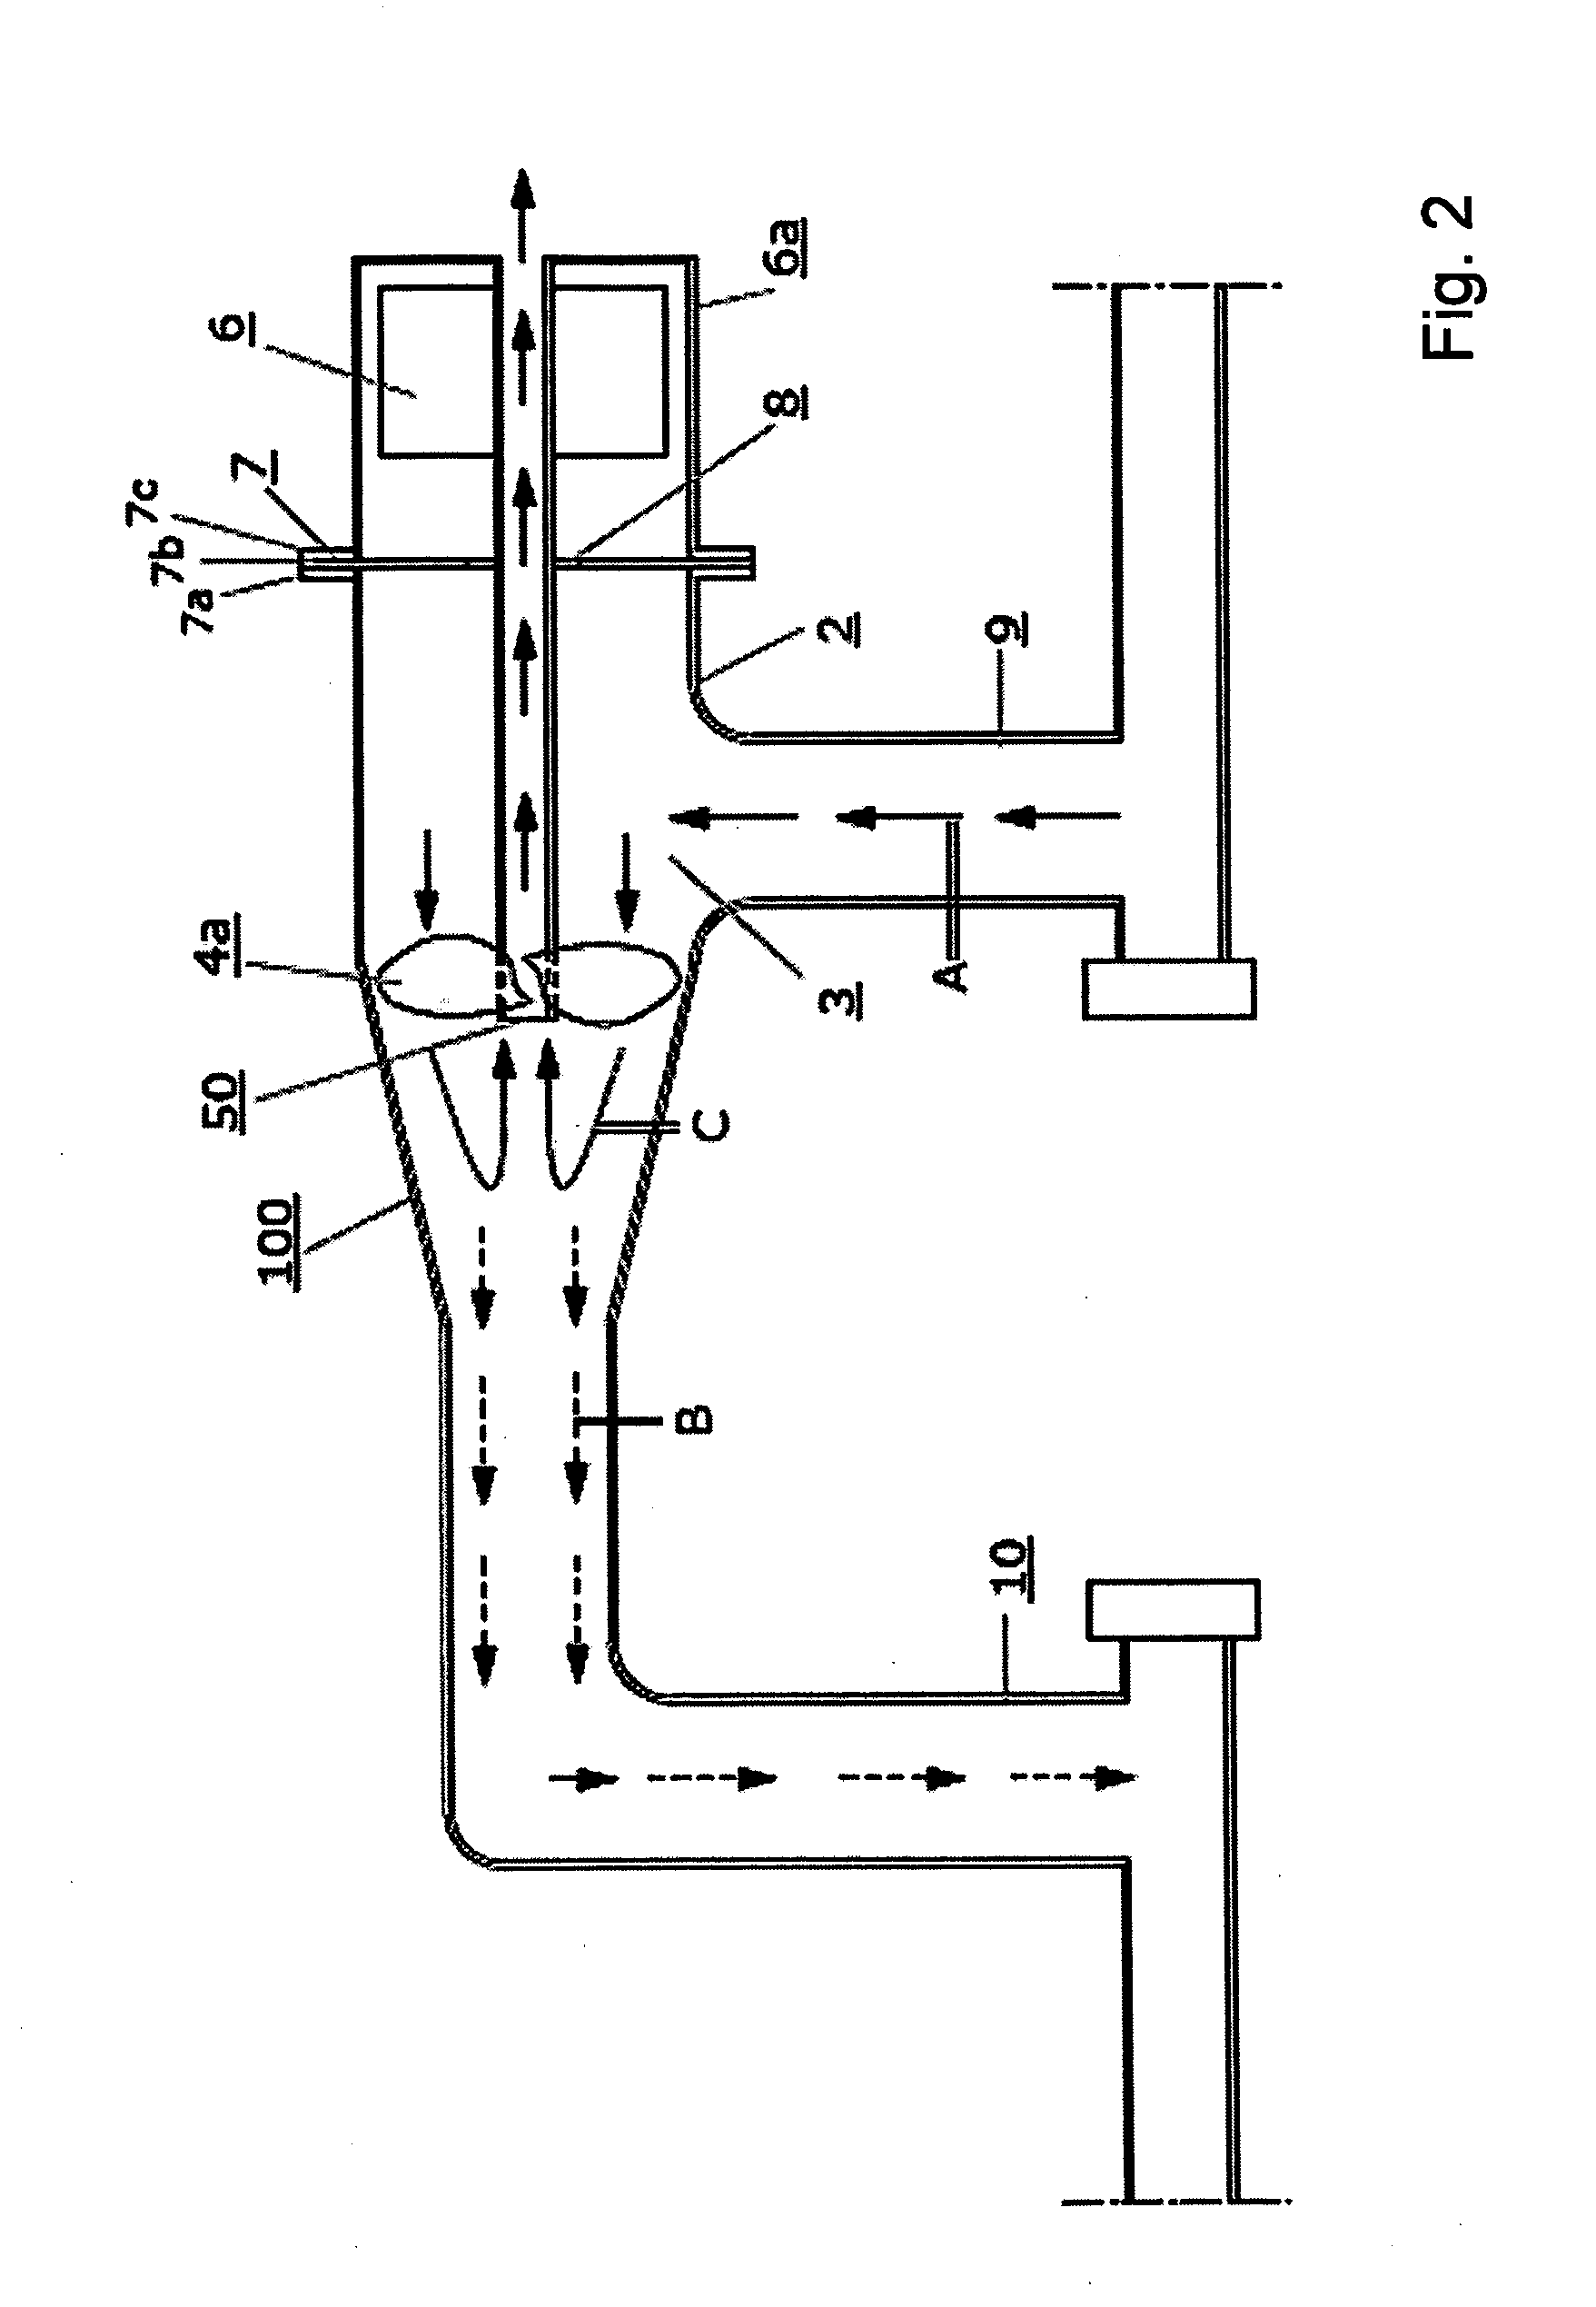 Liquid separating device for the separation of a liquid mixture